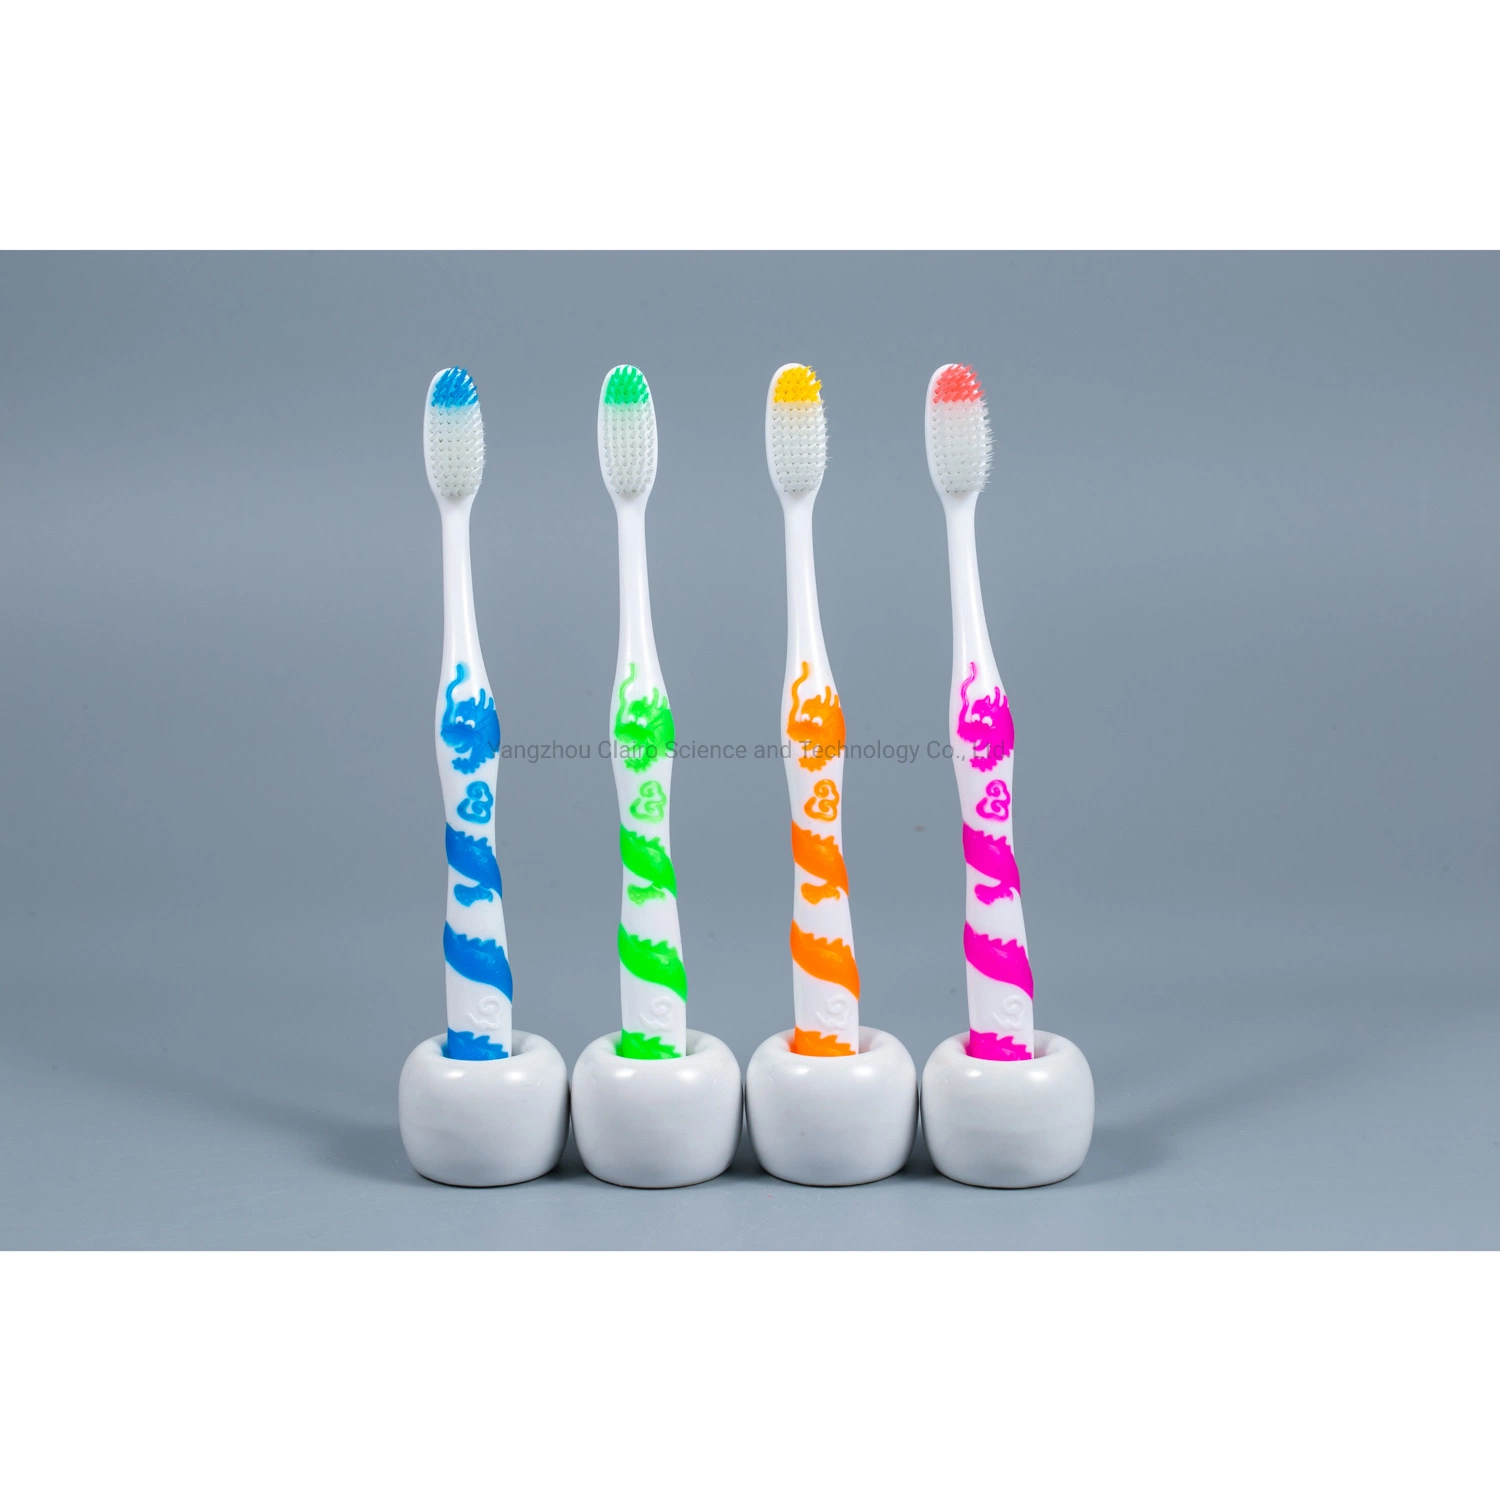 Competitive Price on Time Delivery Toothbrush Manufacturer